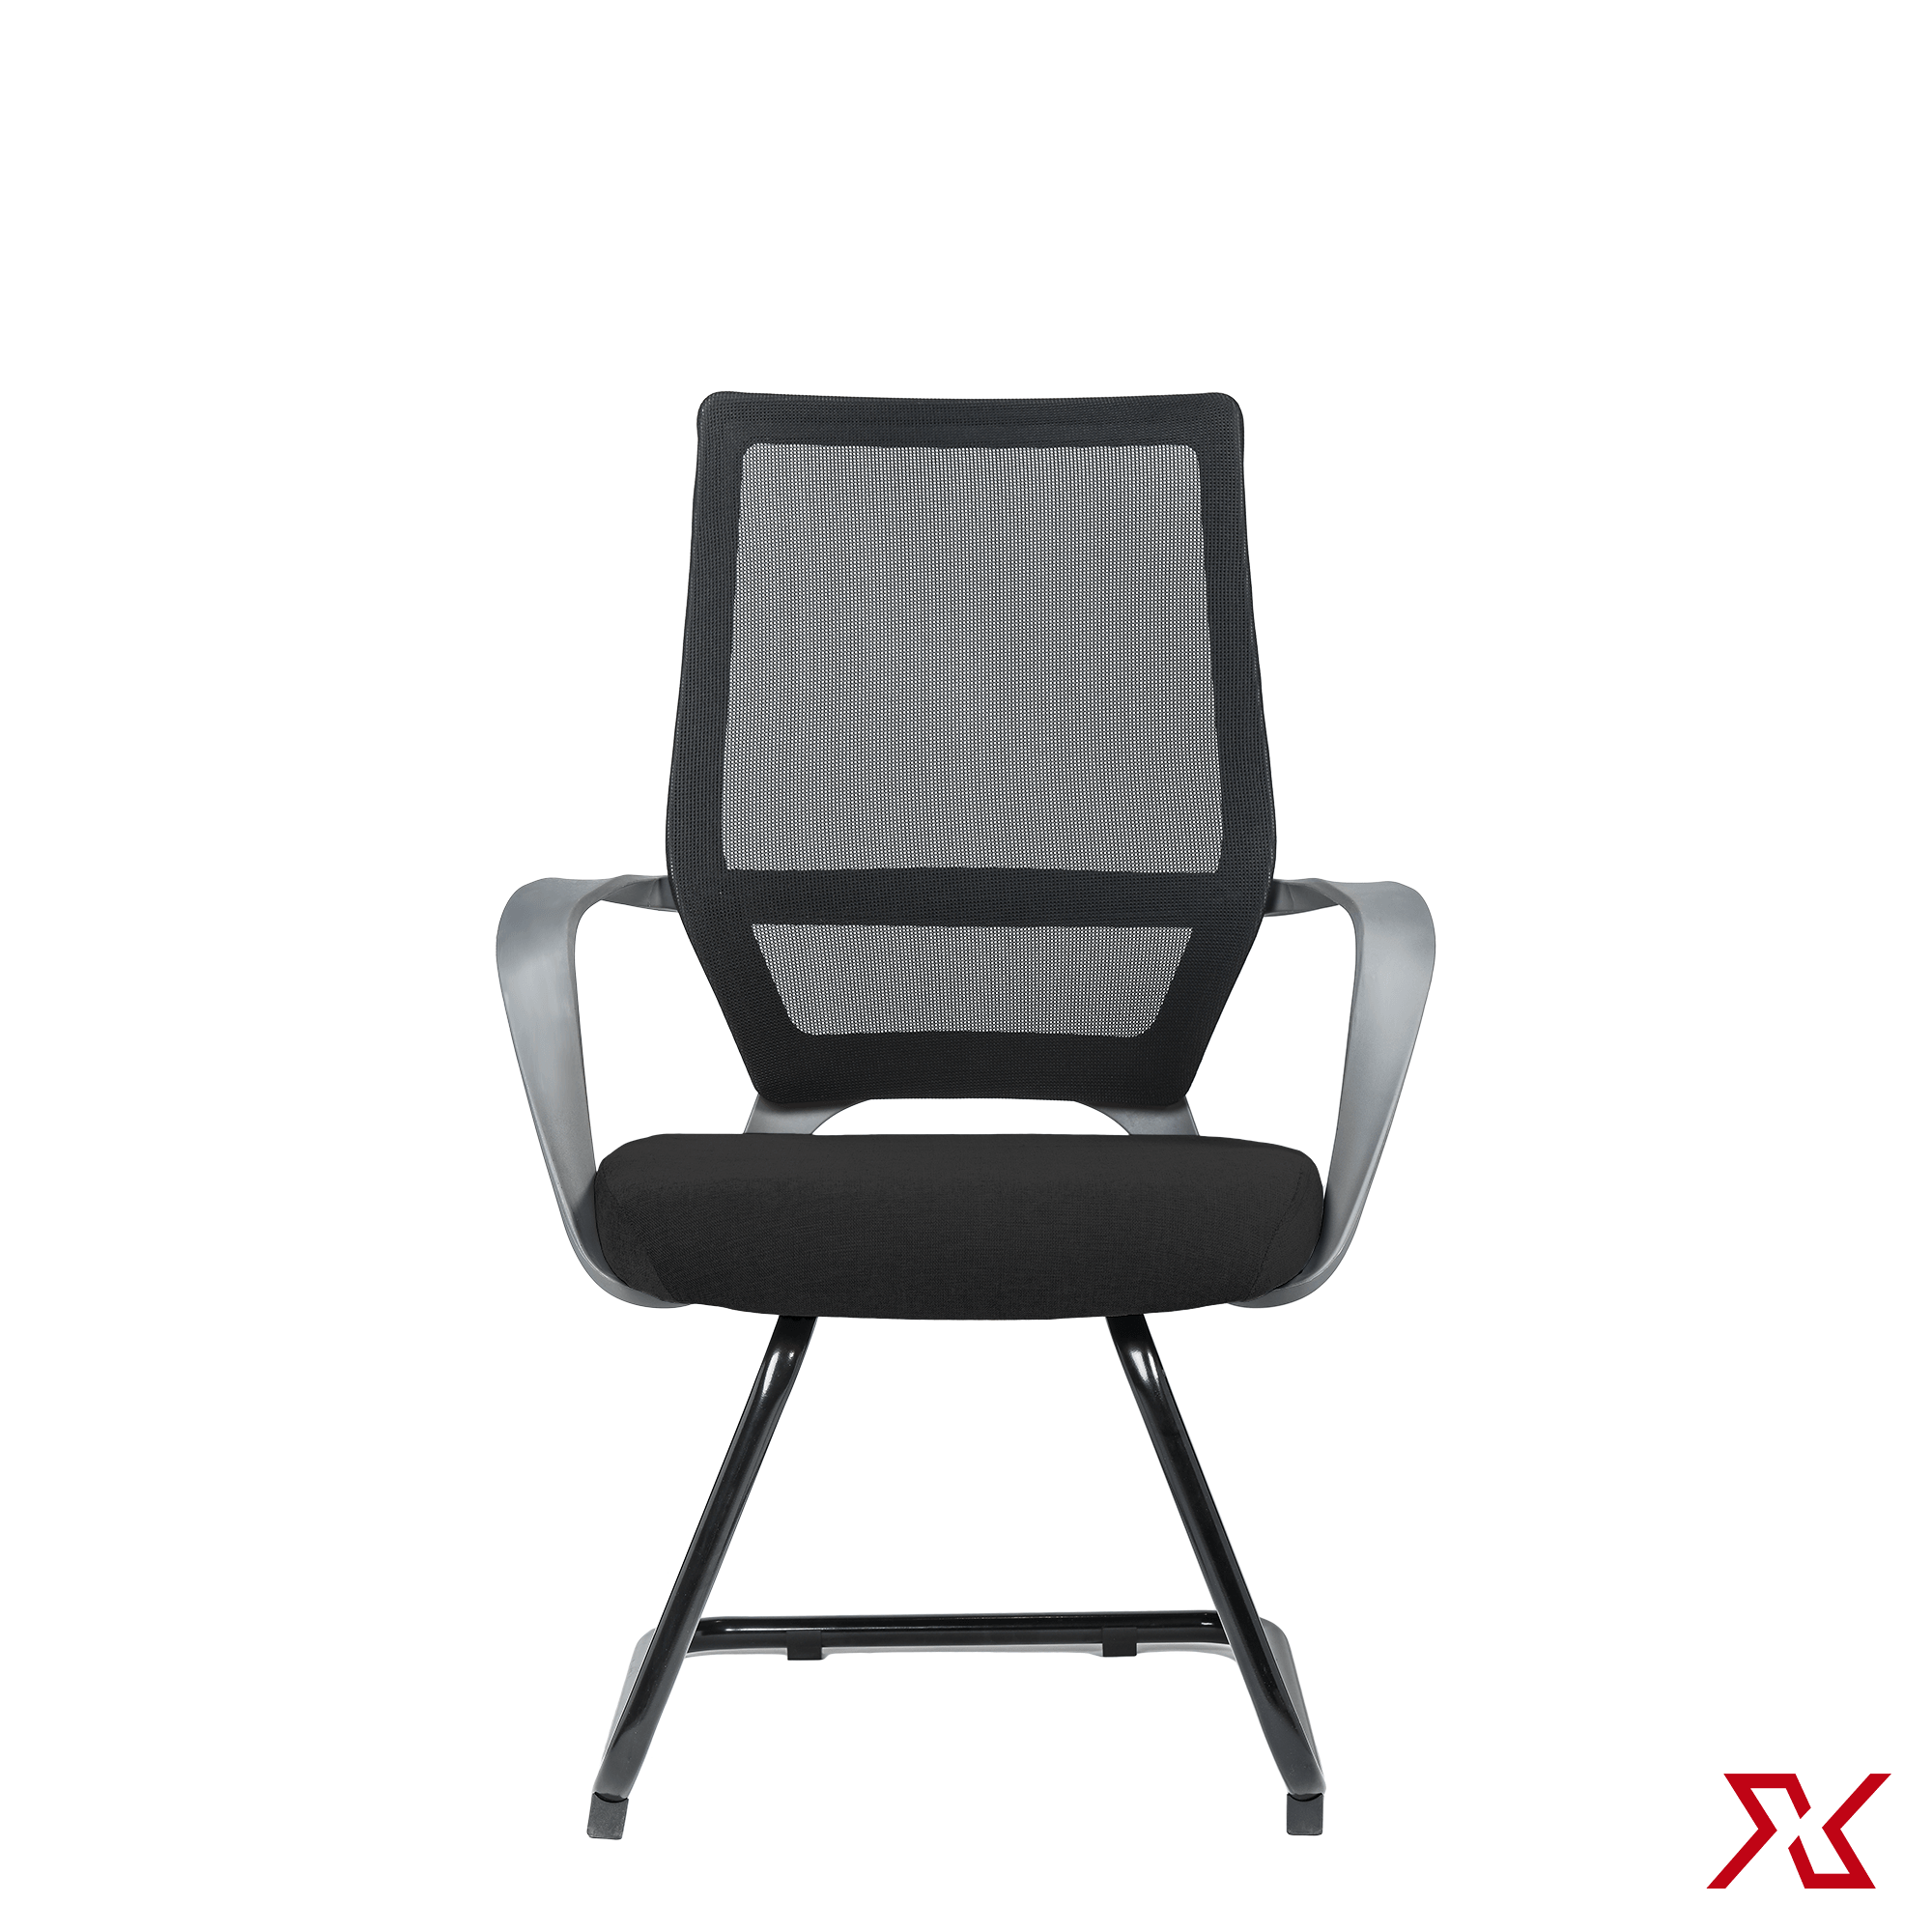 ZAK Medium Back Visitor (Black Chair) - Exclusiff Seating Sytems